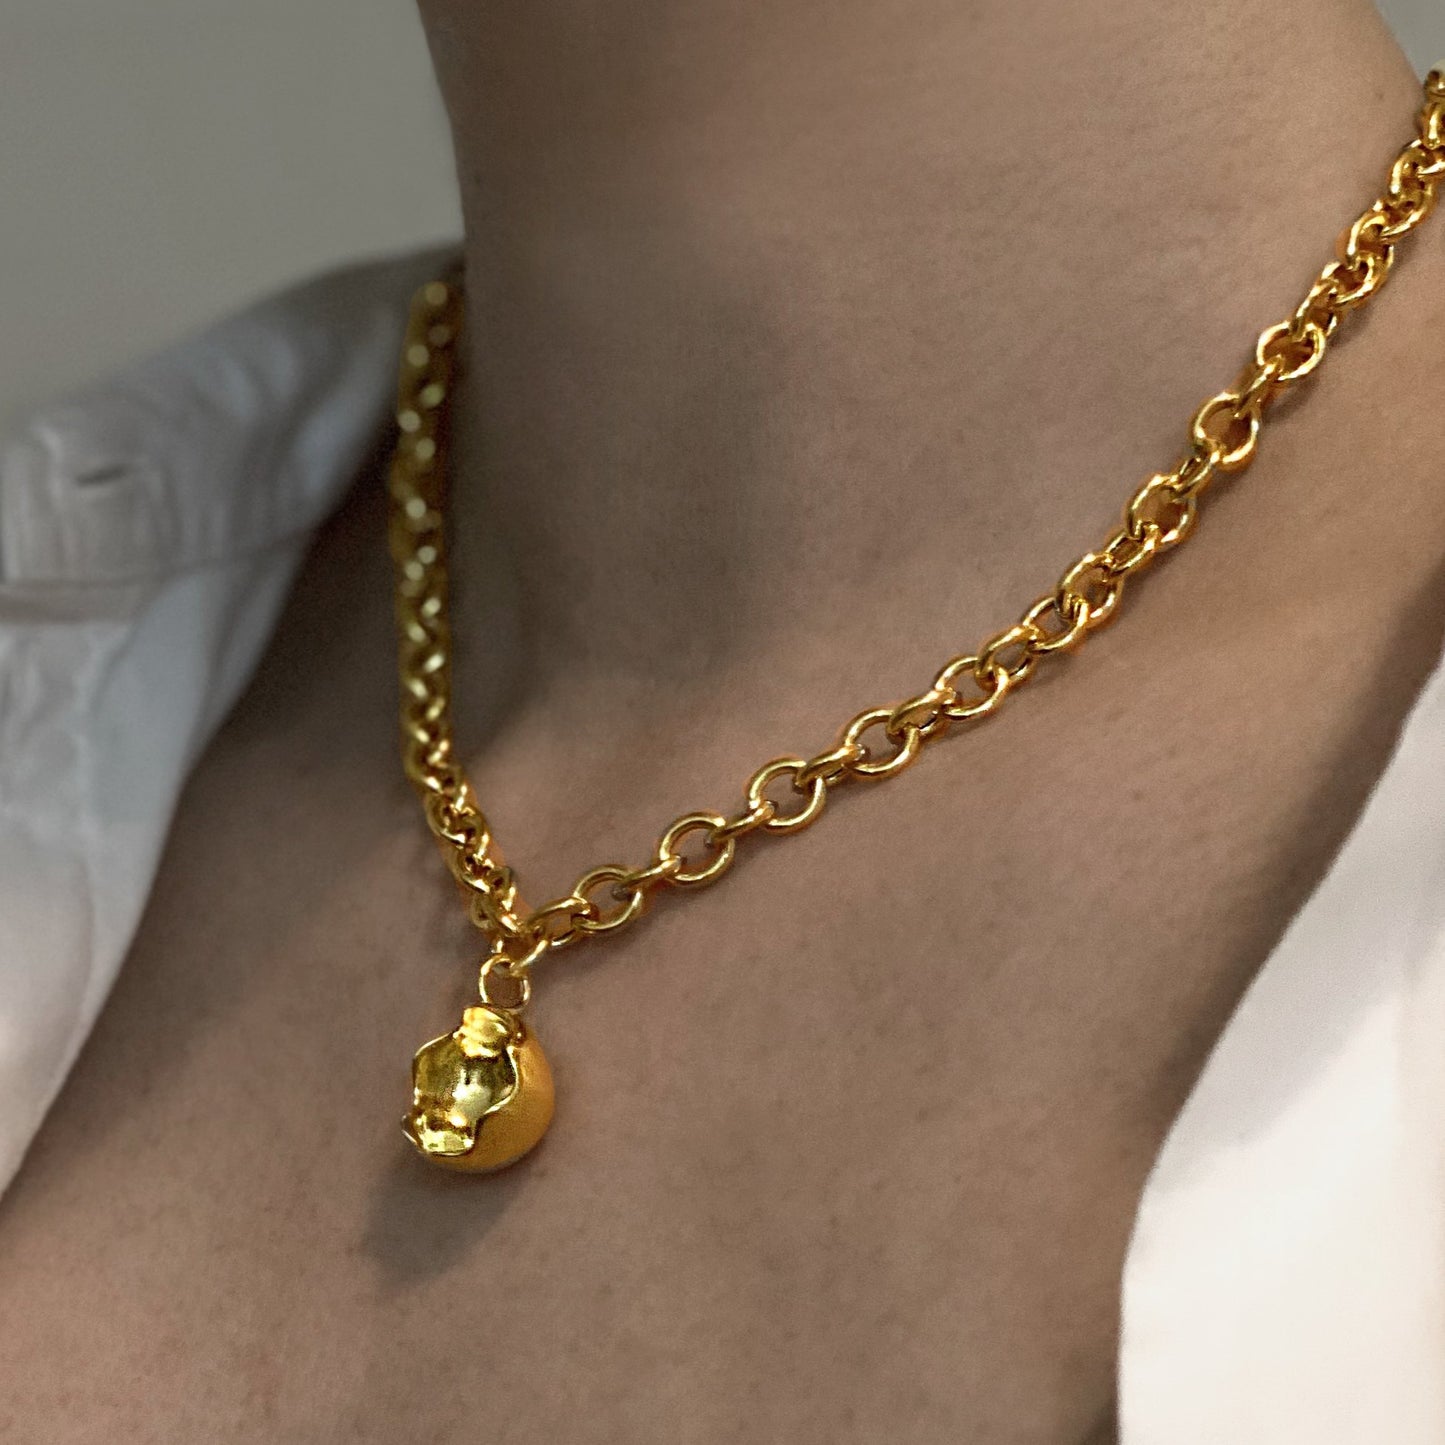 Close up of female neck and chest wearing a chunky chain necklace in gold